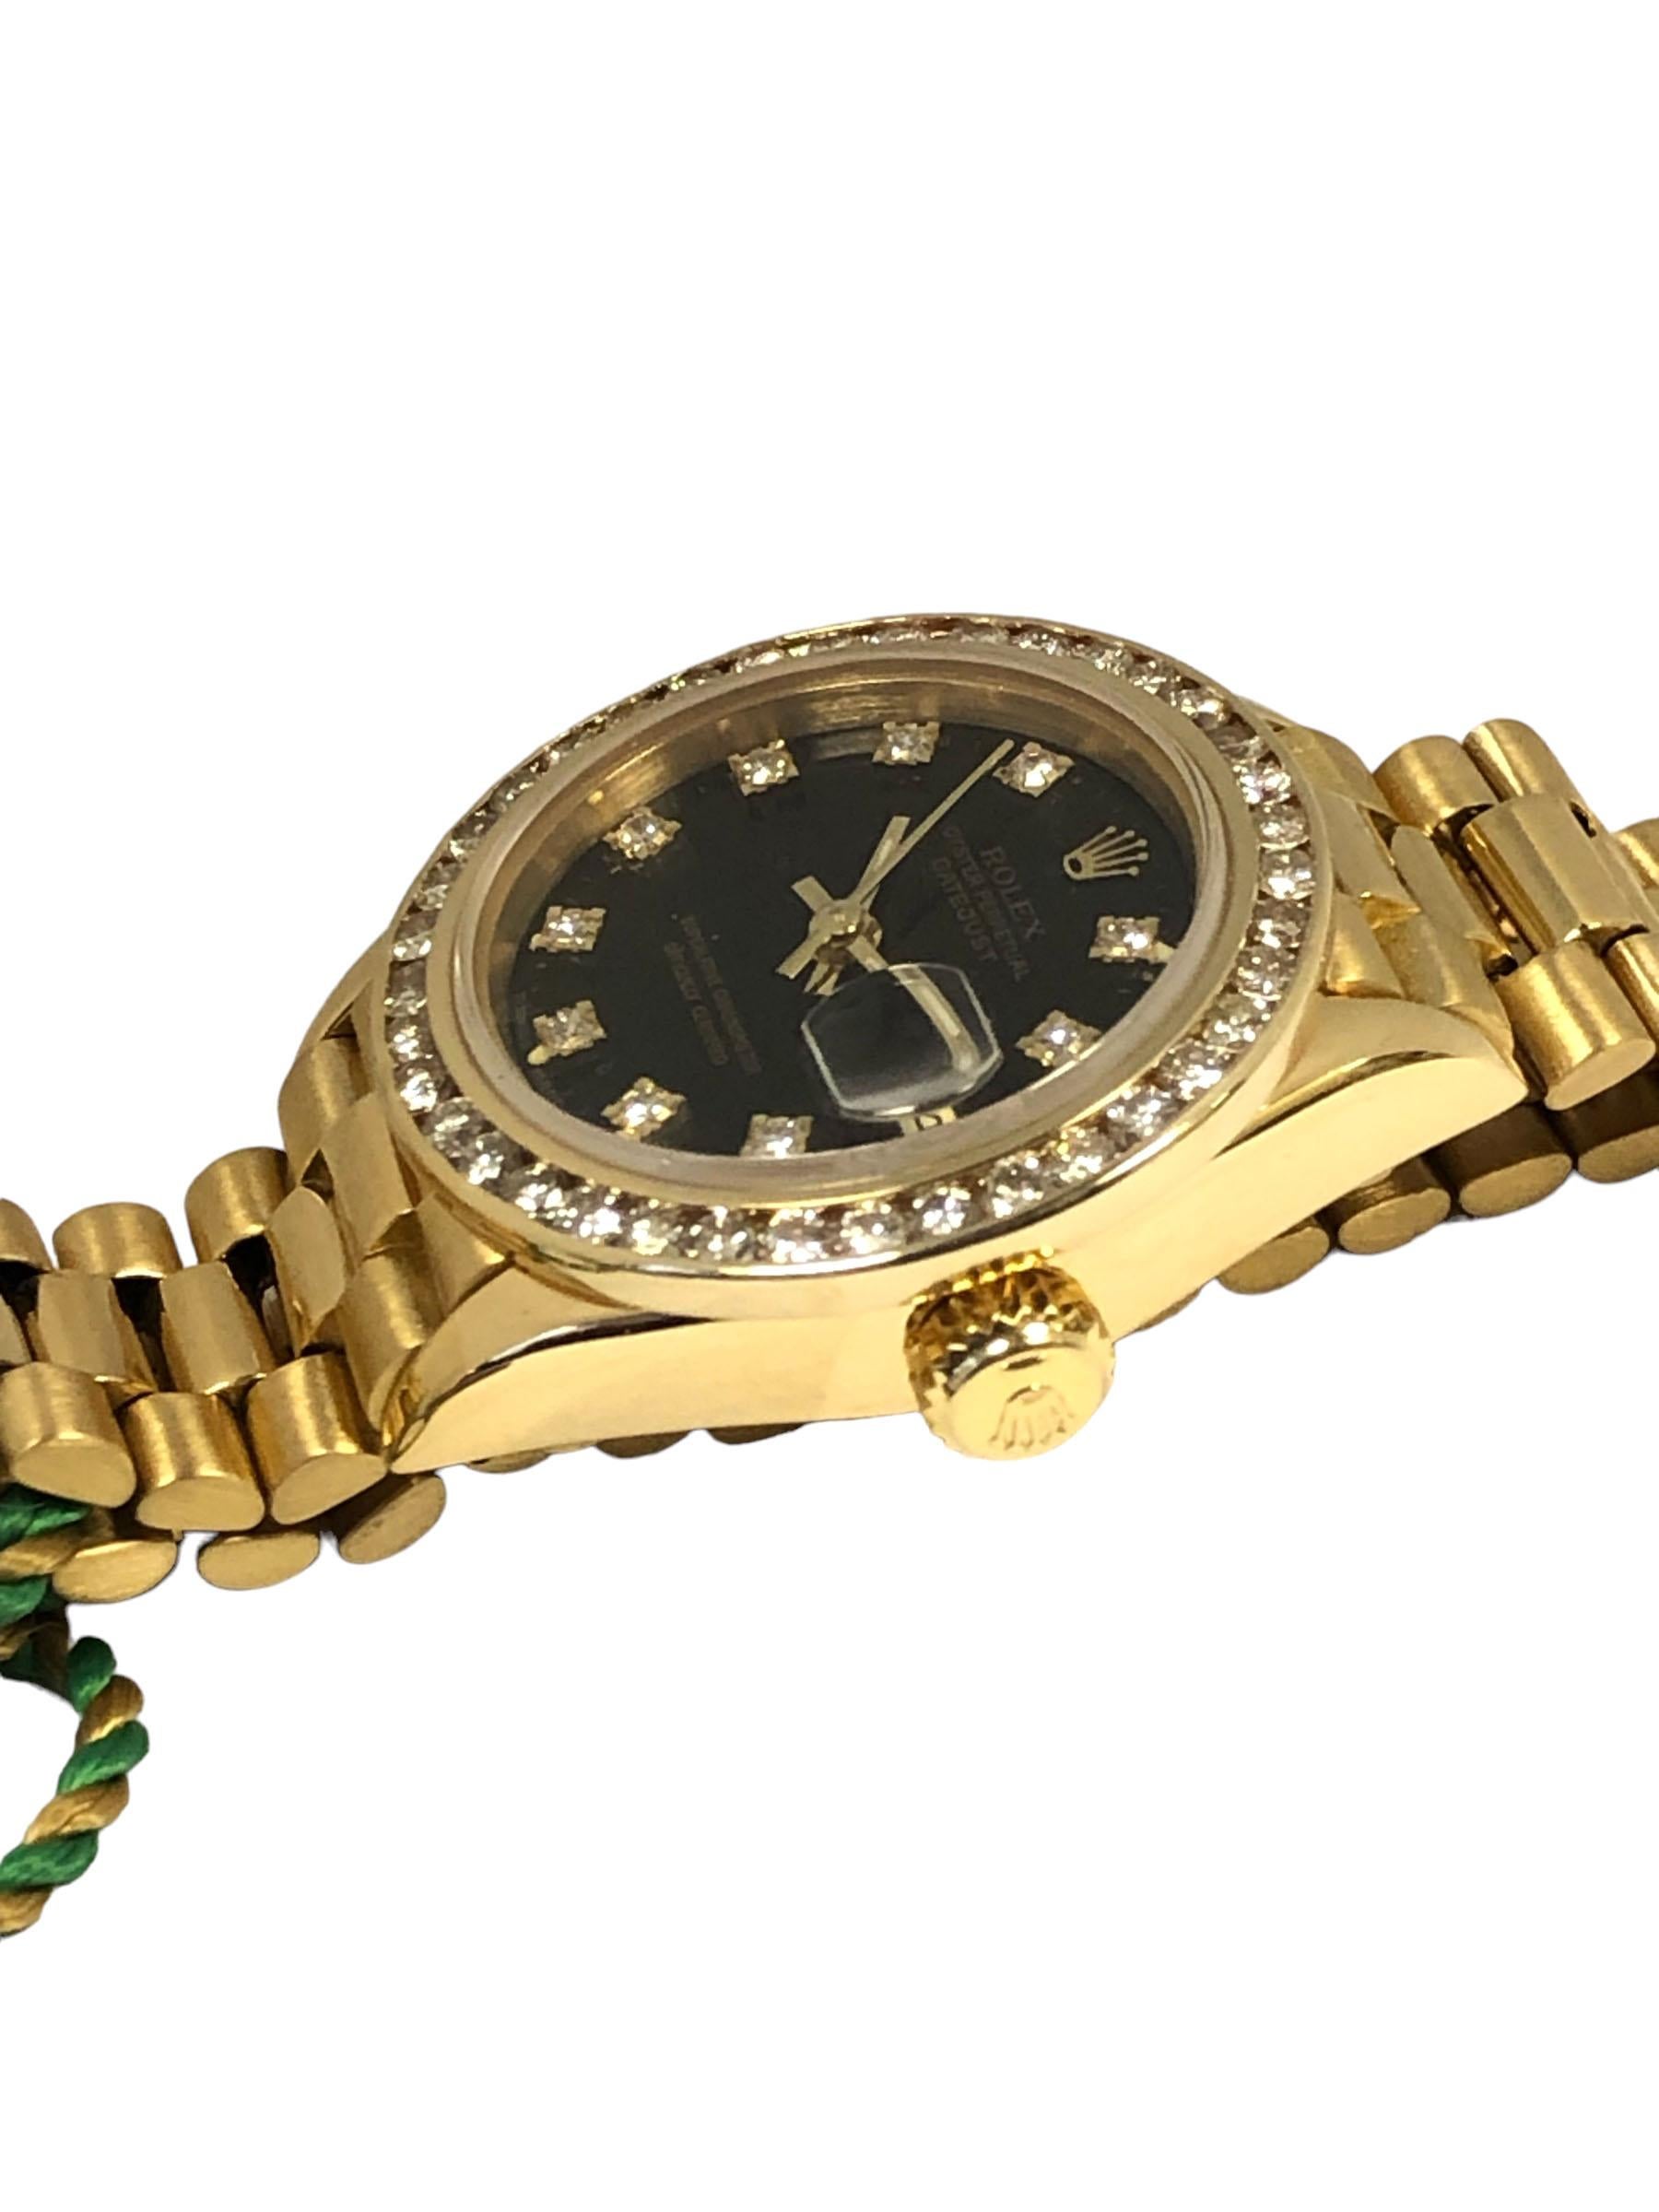 Circa 1988 Rolex Presidential model Ladies Reference 69138 Wrist Watch, 26 M.M. 18k Yellow Gold 3 piece water resistant Oyster case. After Market Full cut Diamond bezel totaling approximately 1 Carat,  29 Jewel Caliber 2135 Automatic, self winding